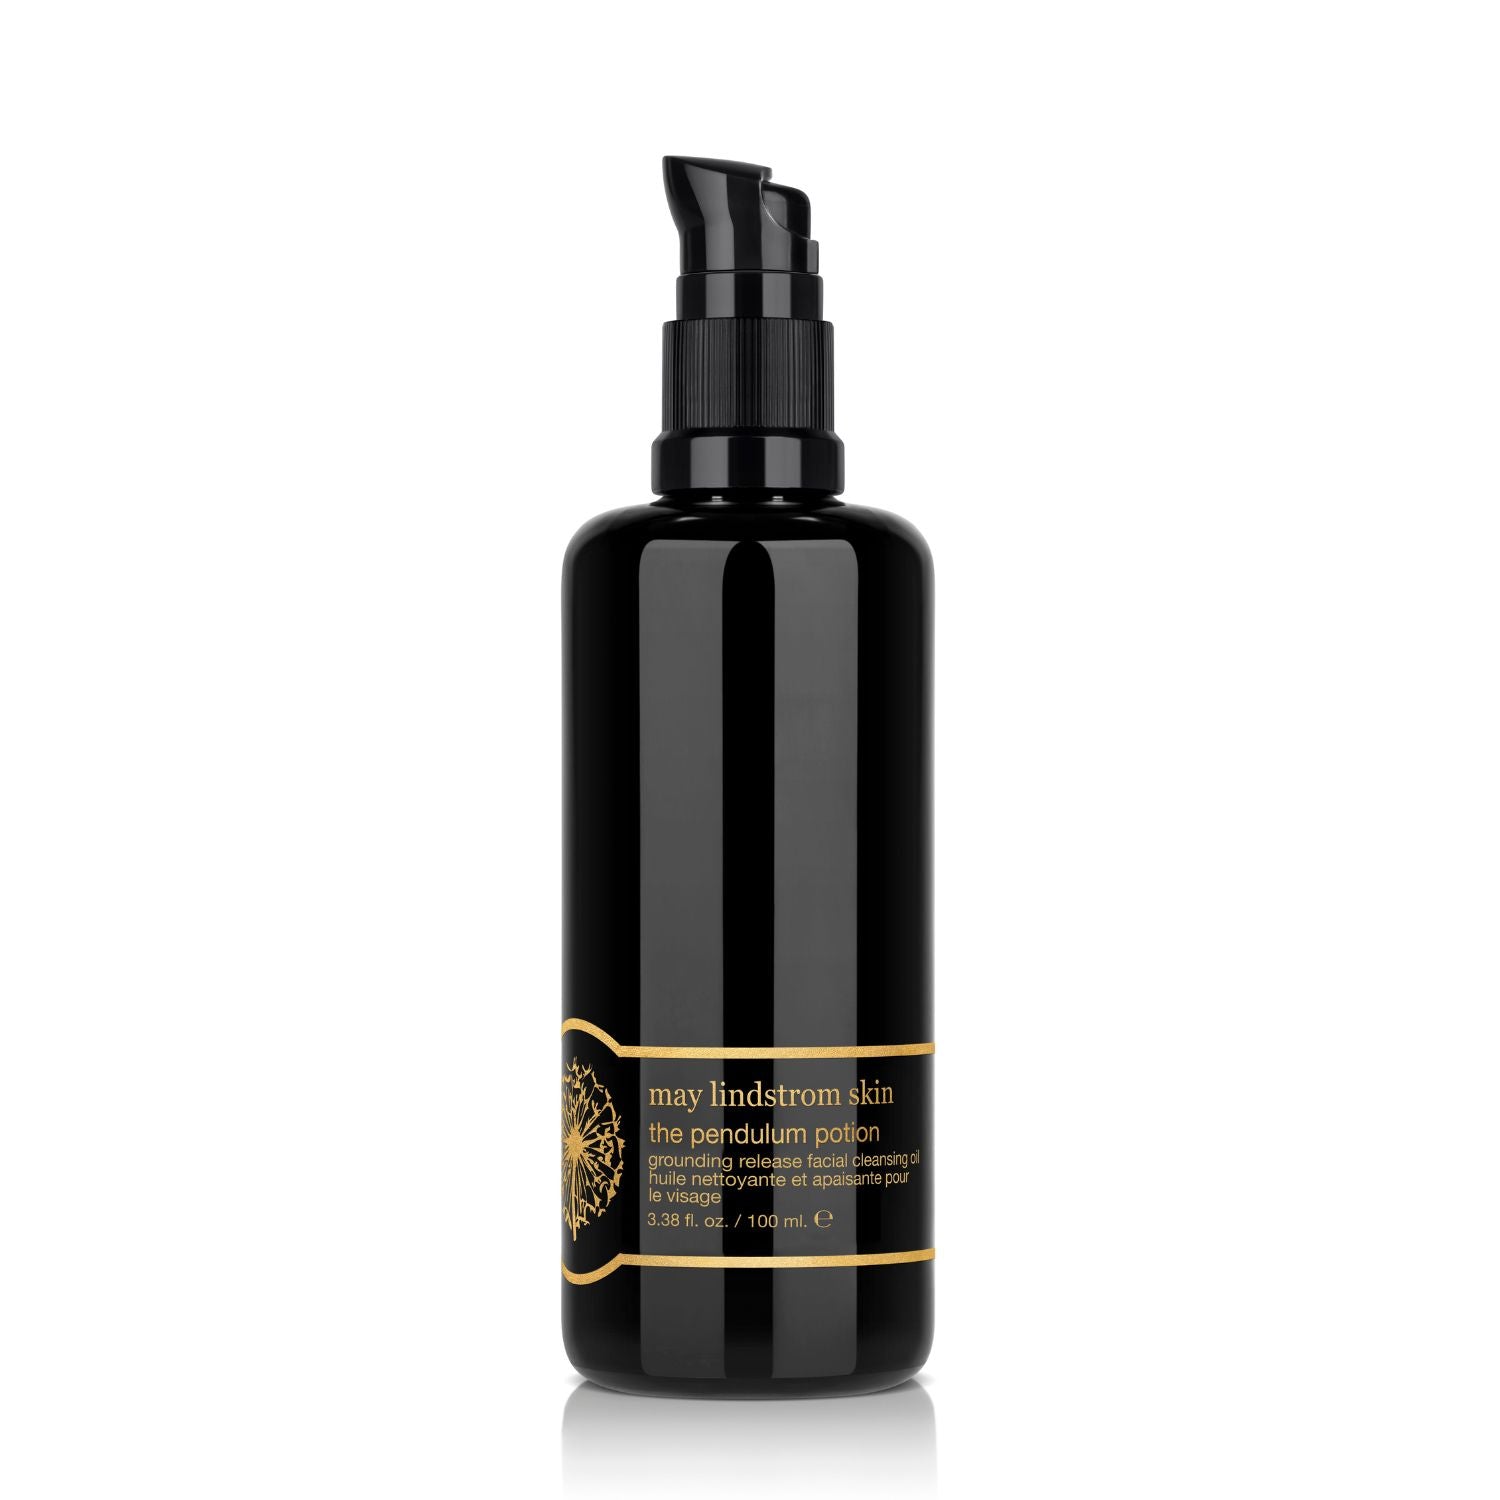 The Pendulum Potion Antioxidant Facial Cleansing Oil May Lindstrom image